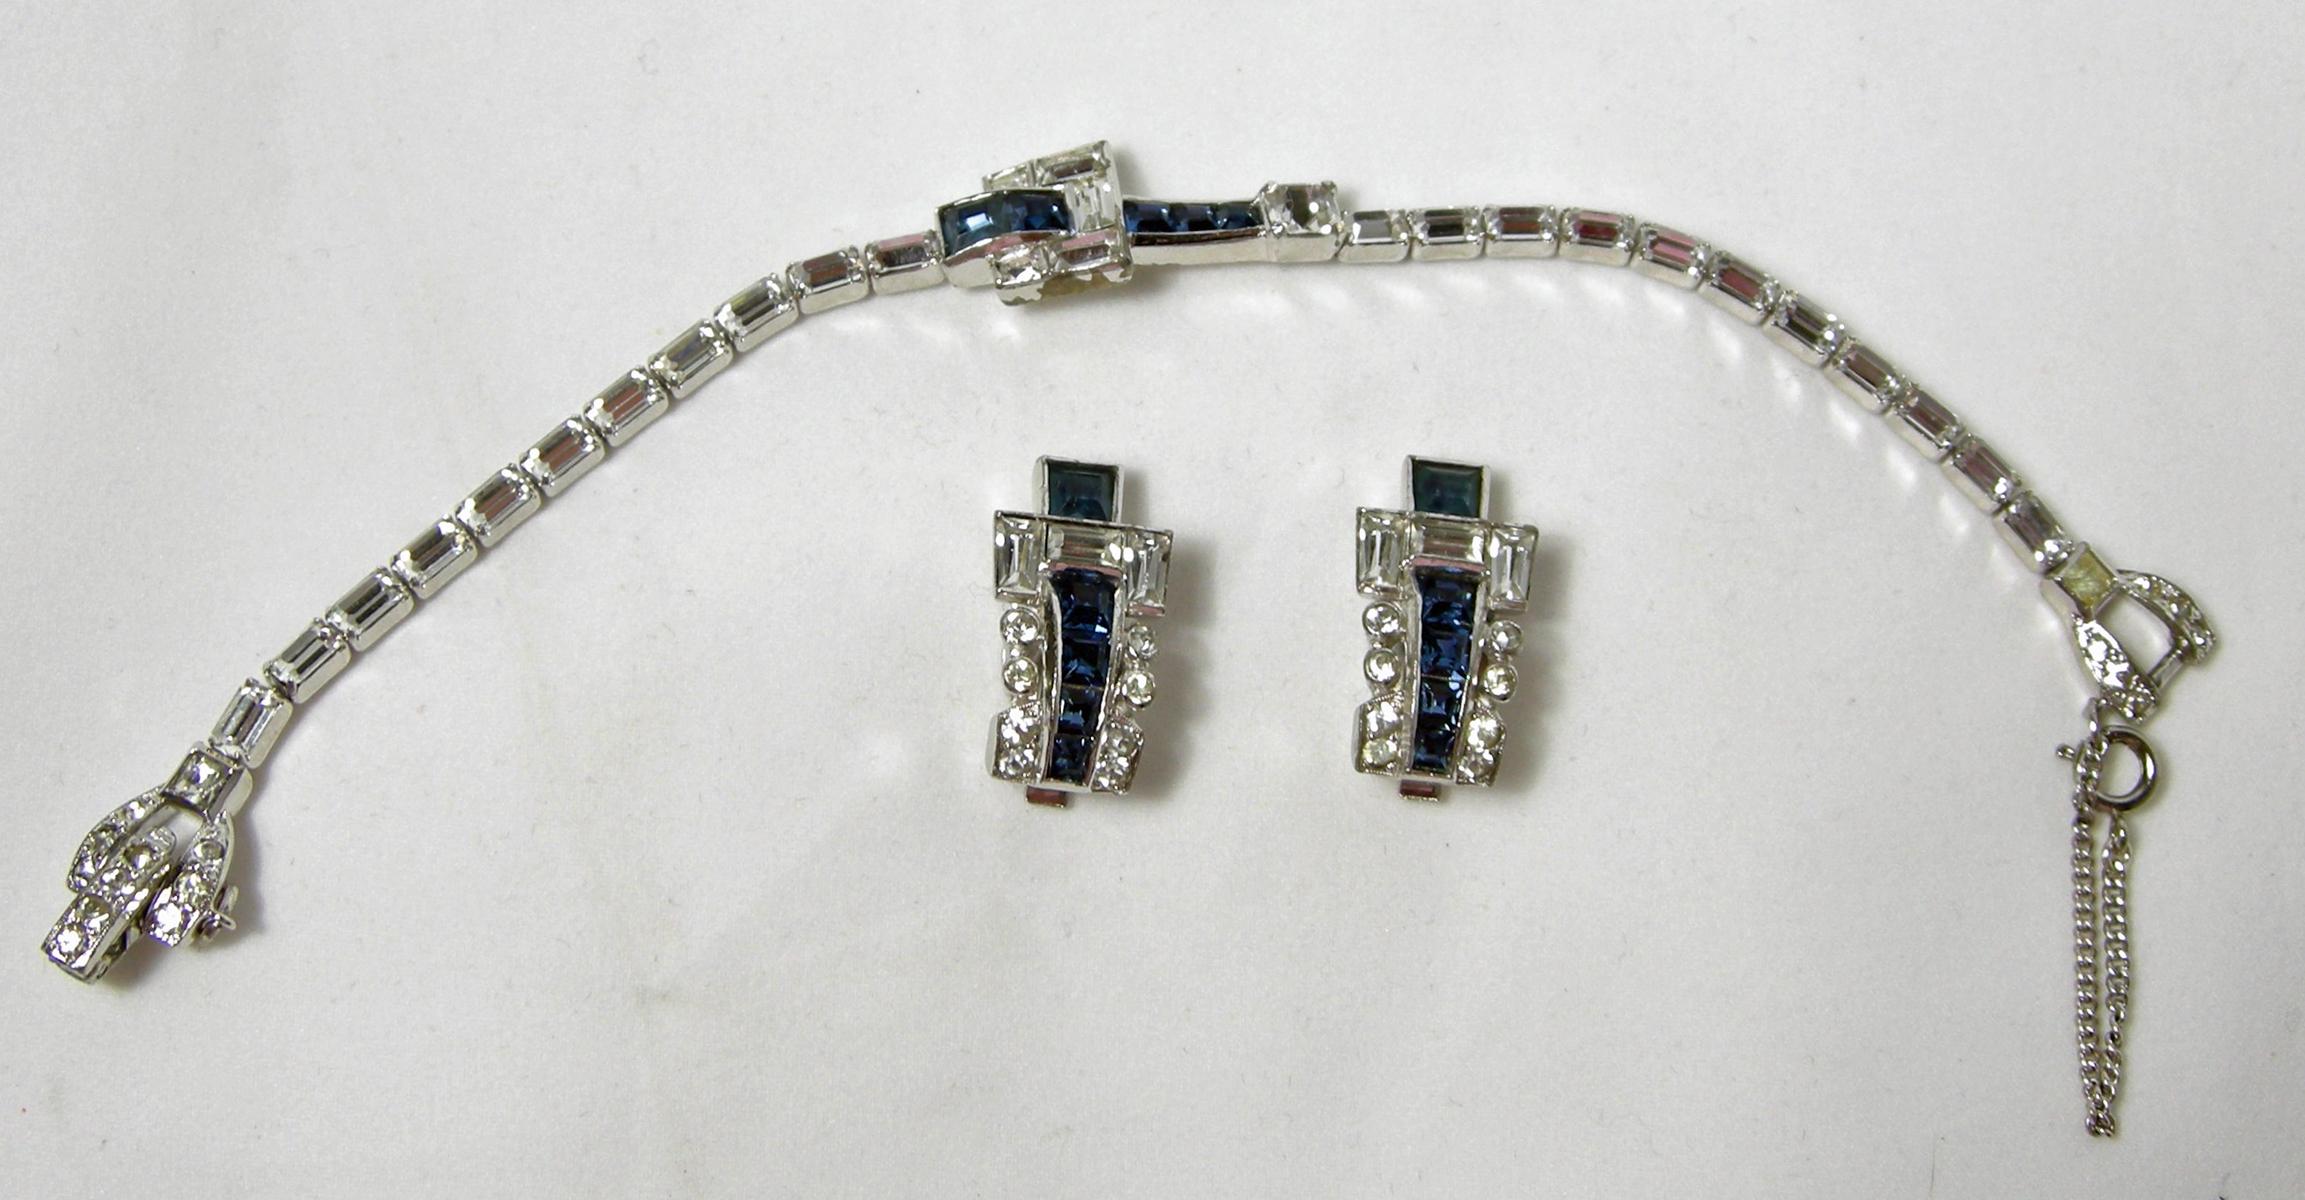 This amazing Mazer set looks real.  It has crystal links leading to the center design of a faux sapphire buckle.  It has a fold over clasp in a silver tone rhodium setting.  It is signed “Mazer Bros.” It measures 7” long.  The buckle is 1” x 1/2